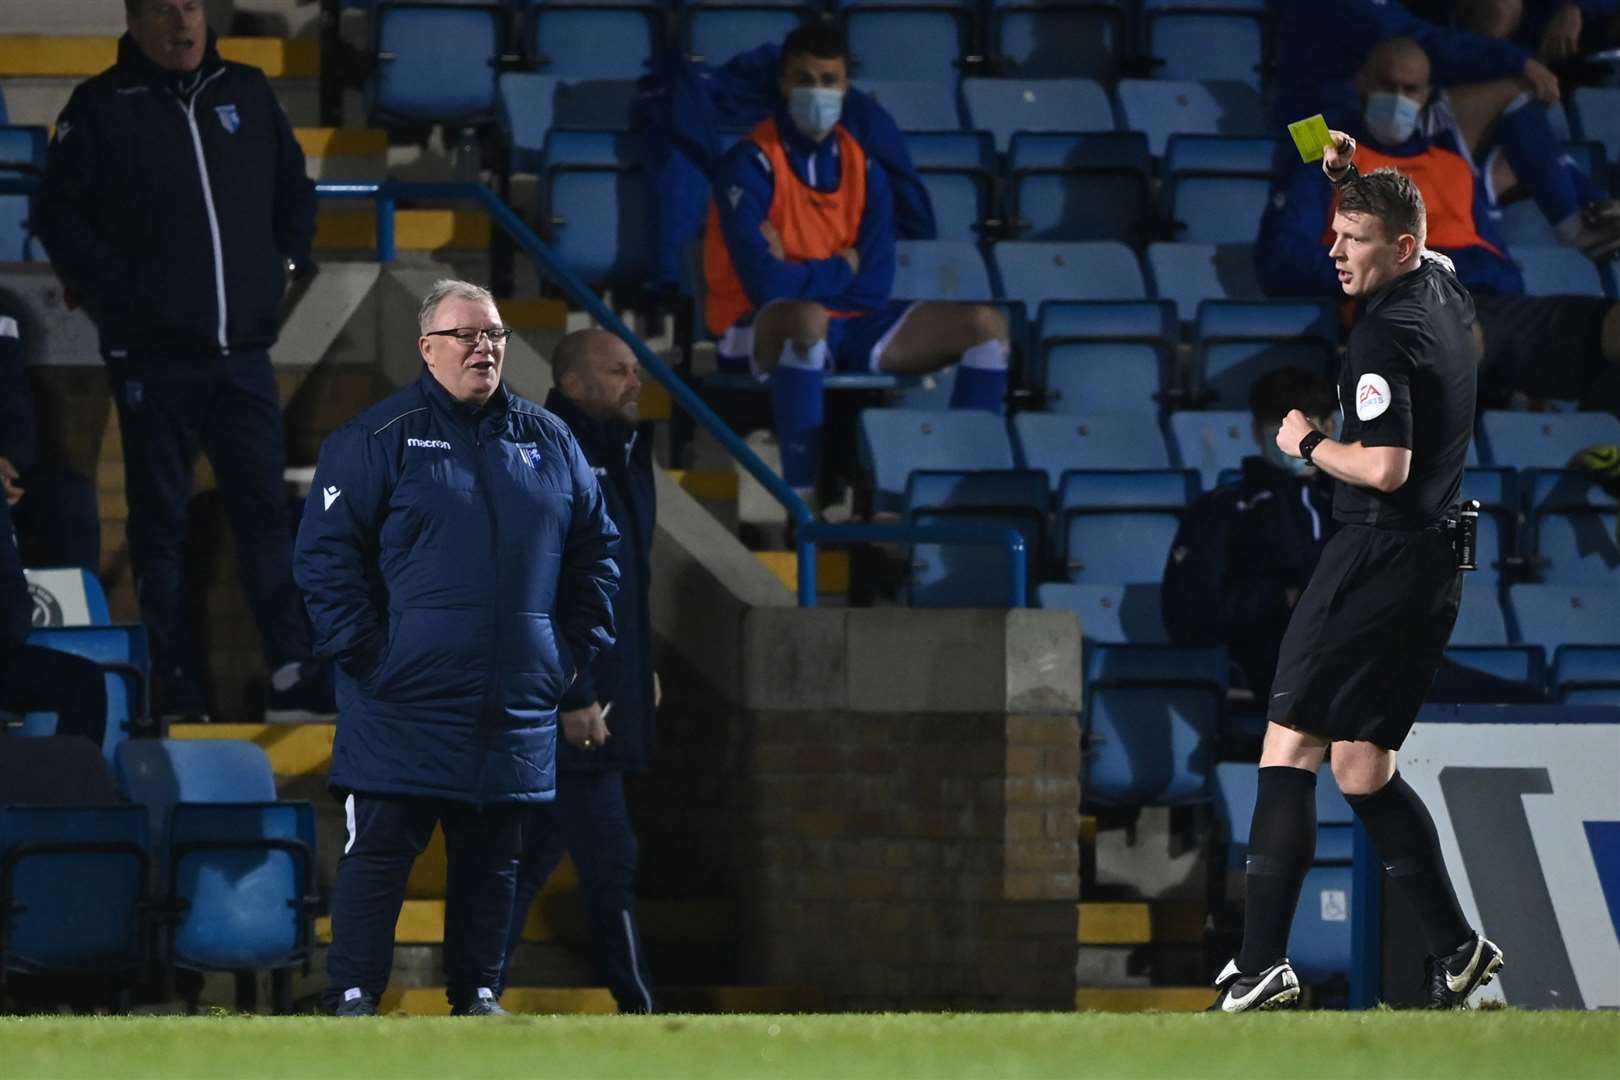 Gillingham manager Steve Evans is booked by the referee for his protests Picture: Keith Gillard